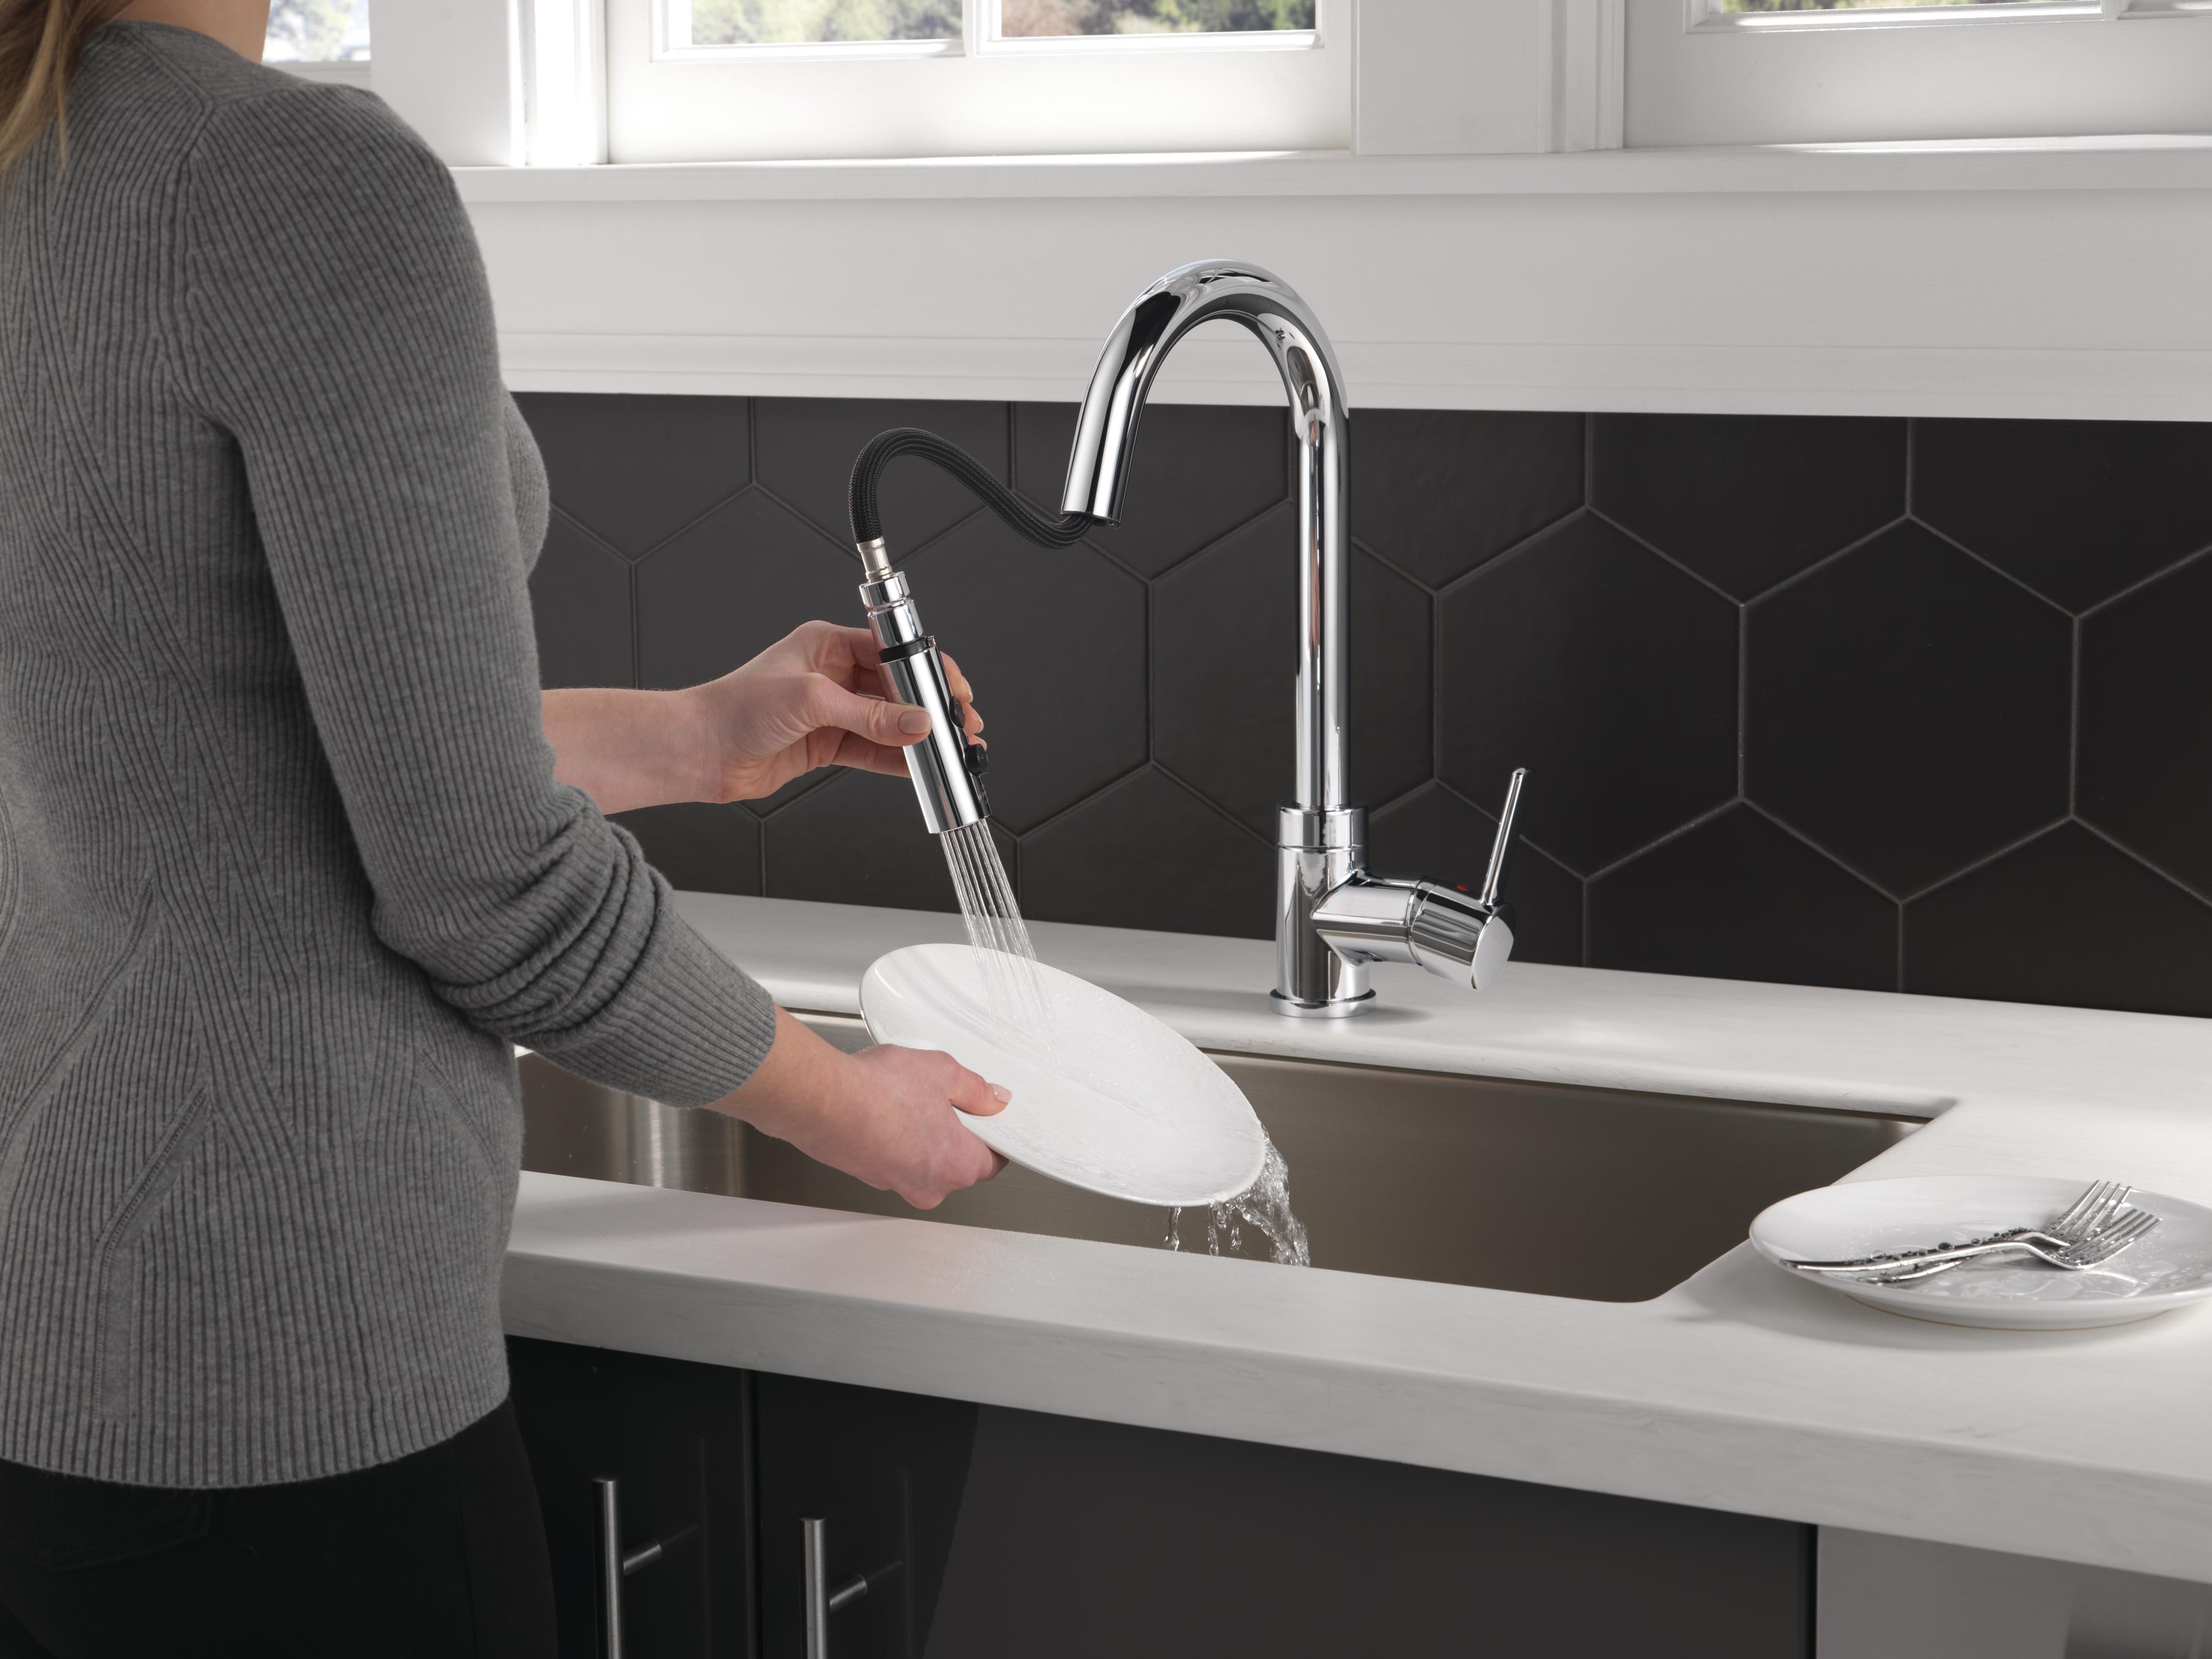 Peerless Precept Single Handle Pull-Down Sprayer Kitchen Faucet in Chrome P188152LF - image 5 of 15